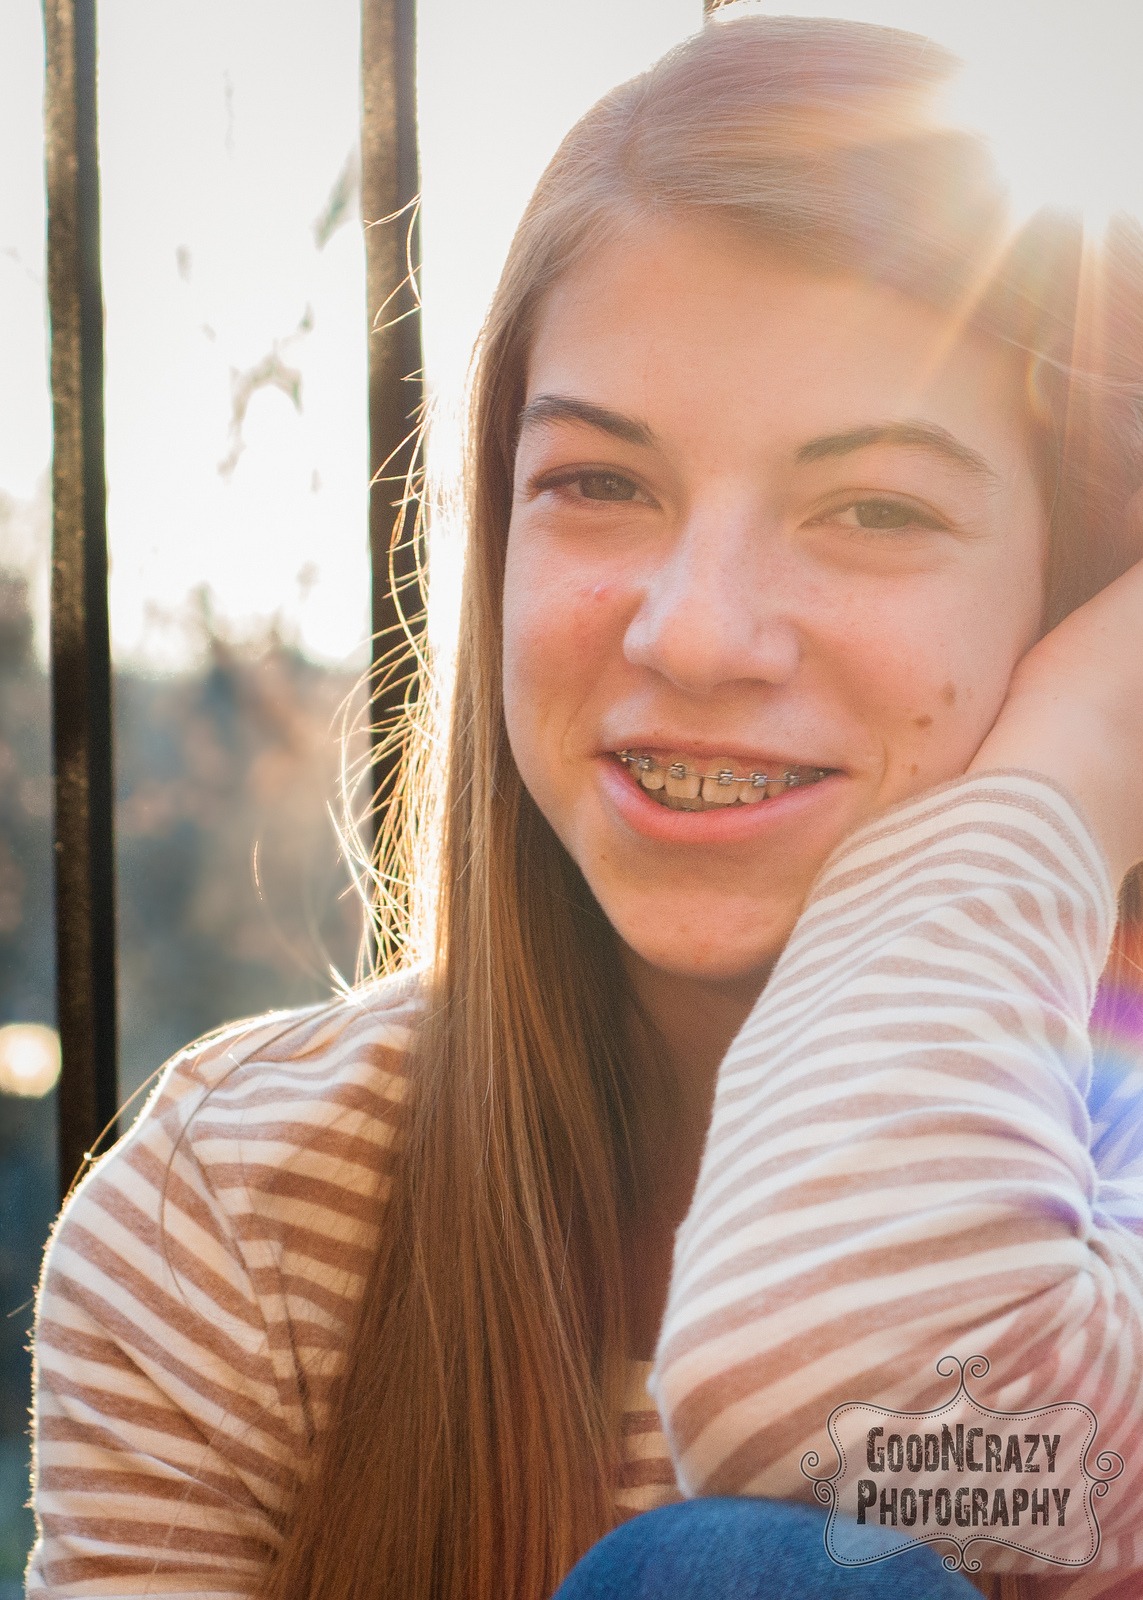 Five Tips in Caring for Your Braces during Orthodontic Treatment